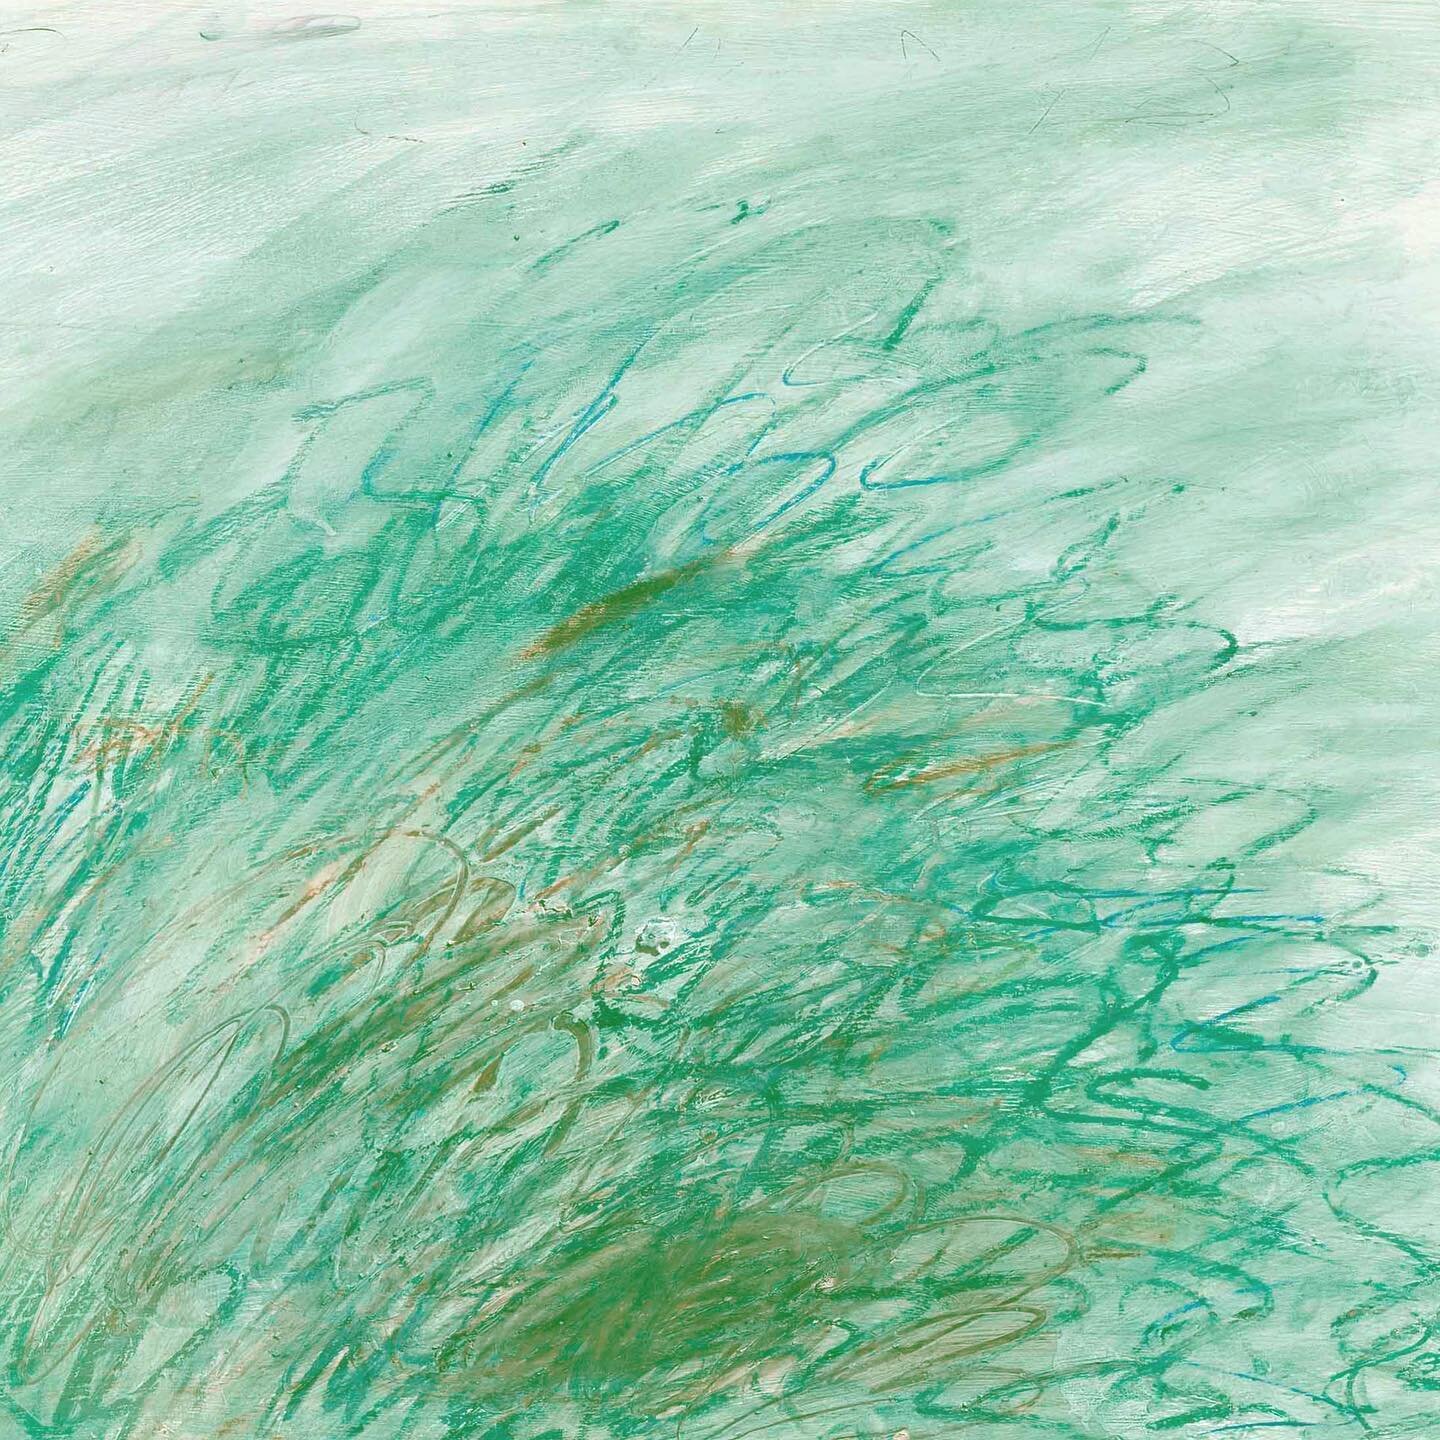 LAYERED... fundamentally abstract, yet harboring complex meanings, Twombly's works often allude to mythological subjects or to artifacts of the ancient past. CYTWOMBLY, On Returning from Tonnicoda,1973 SWIPE to see our Collier where we play with mean